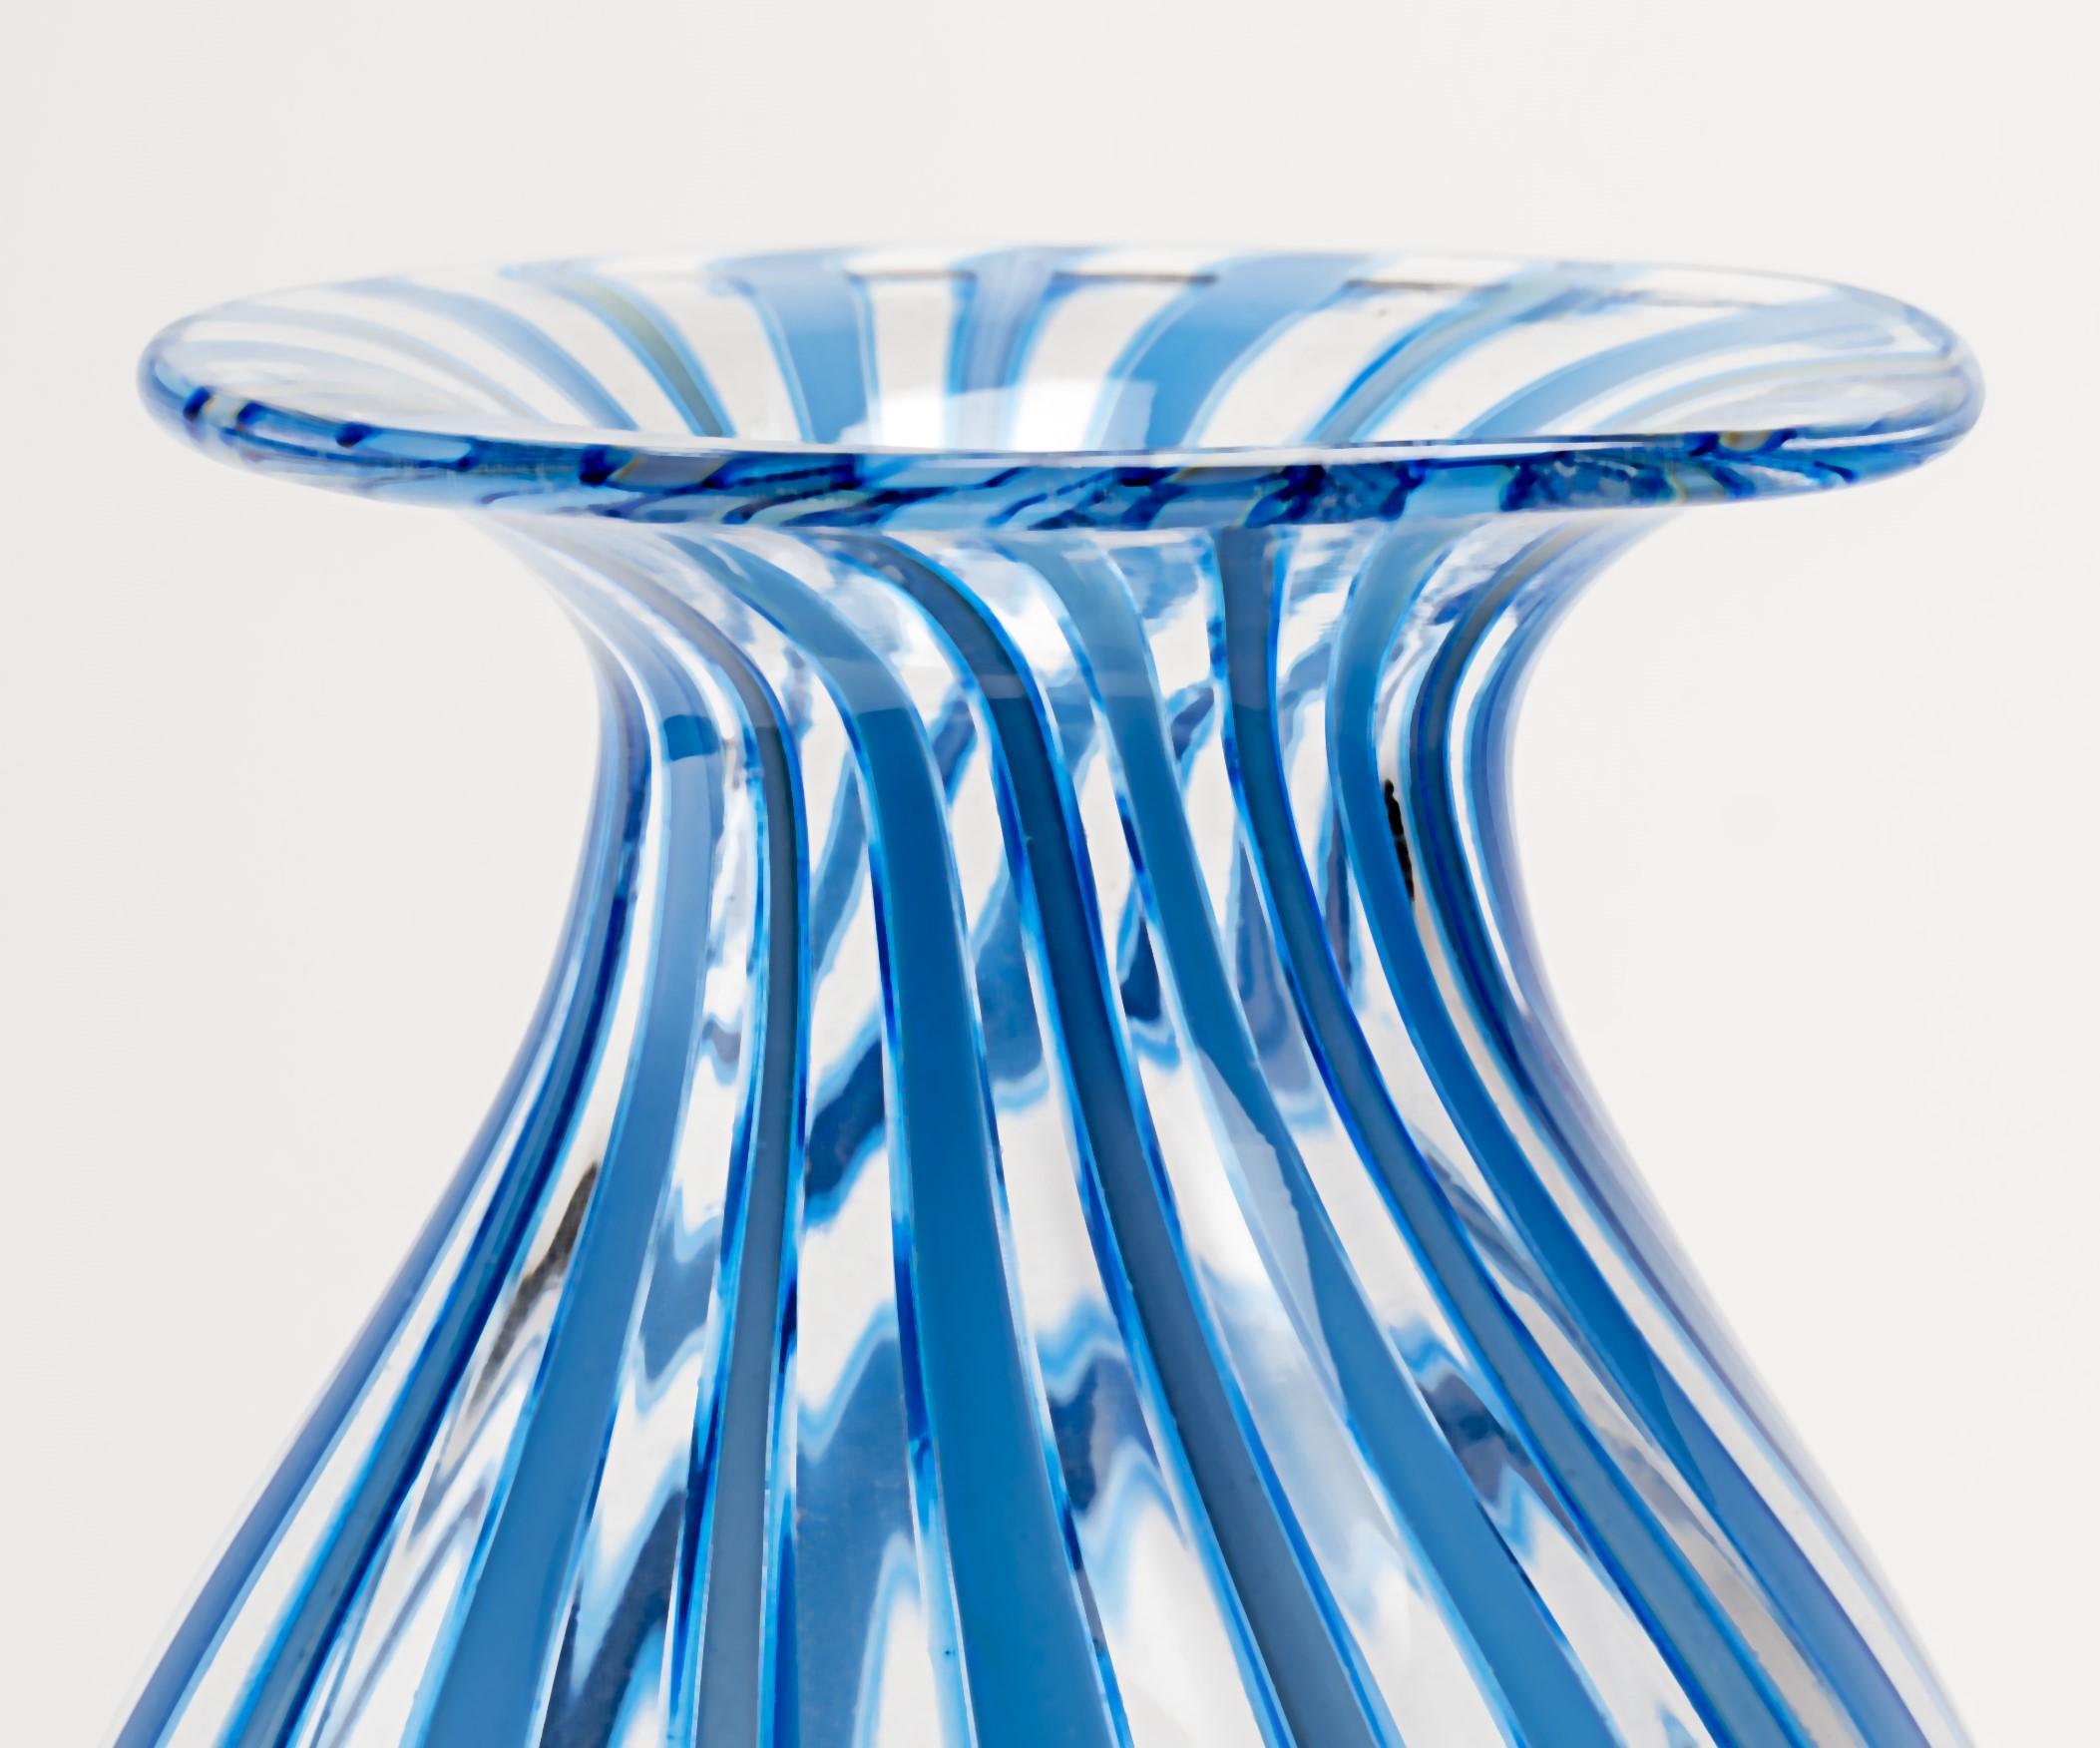 Jeremiah Jacobs, a skilled glassblower, has crafted a stunning blown glass piece using the filigrana cane technique. The artwork features a mesmerizing combination of blue and clear stripes, showcasing the artist's expertise in manipulating